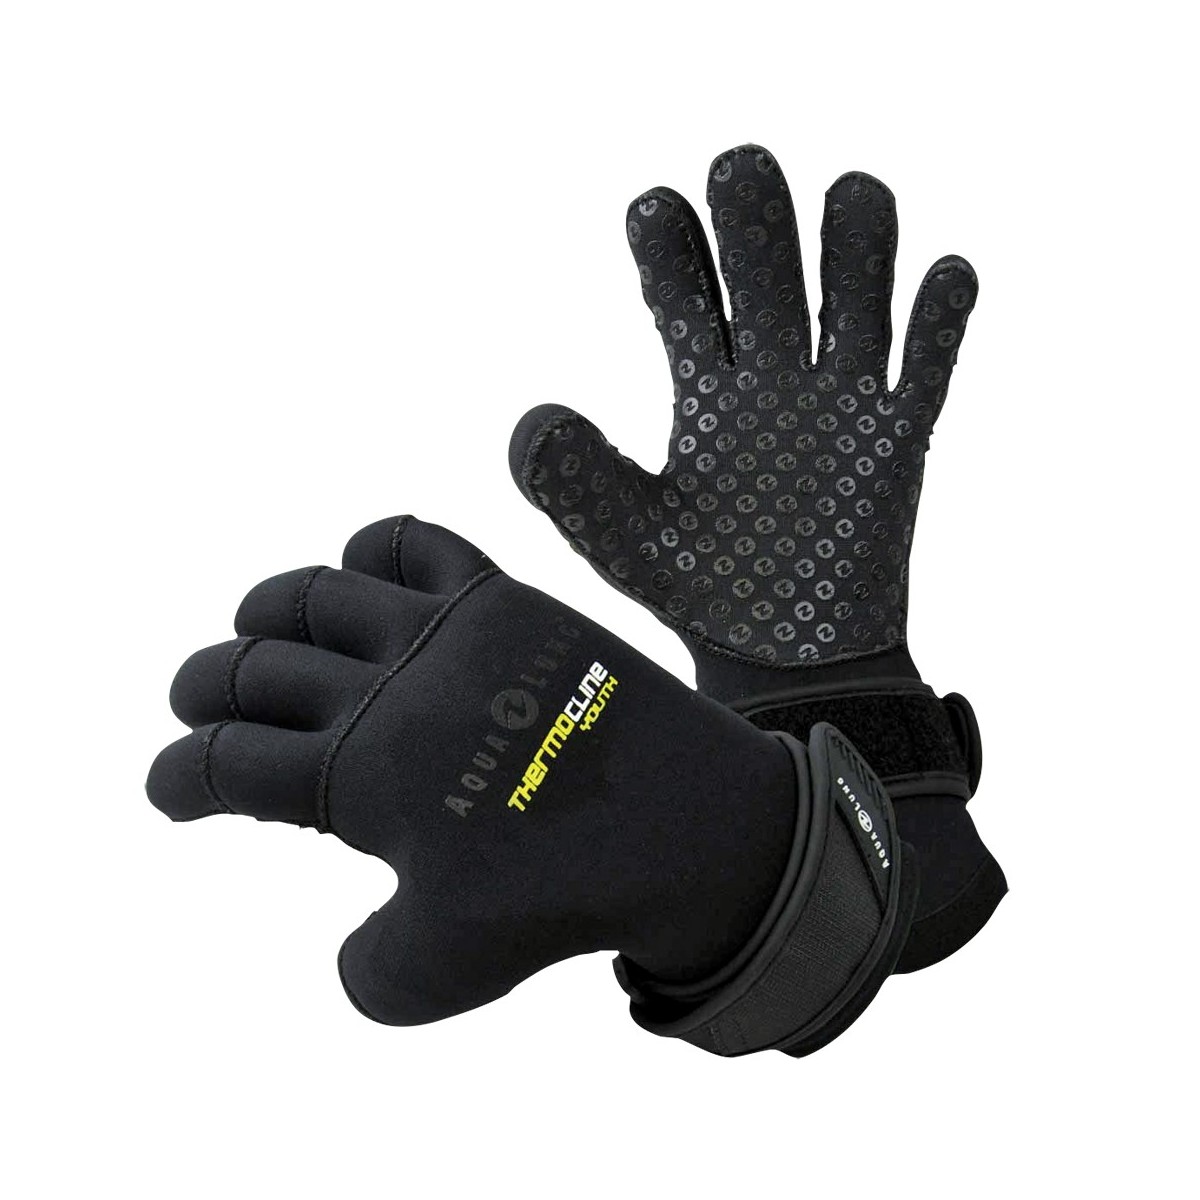 Aqua Lung 3mm Thermocline Youth Glove